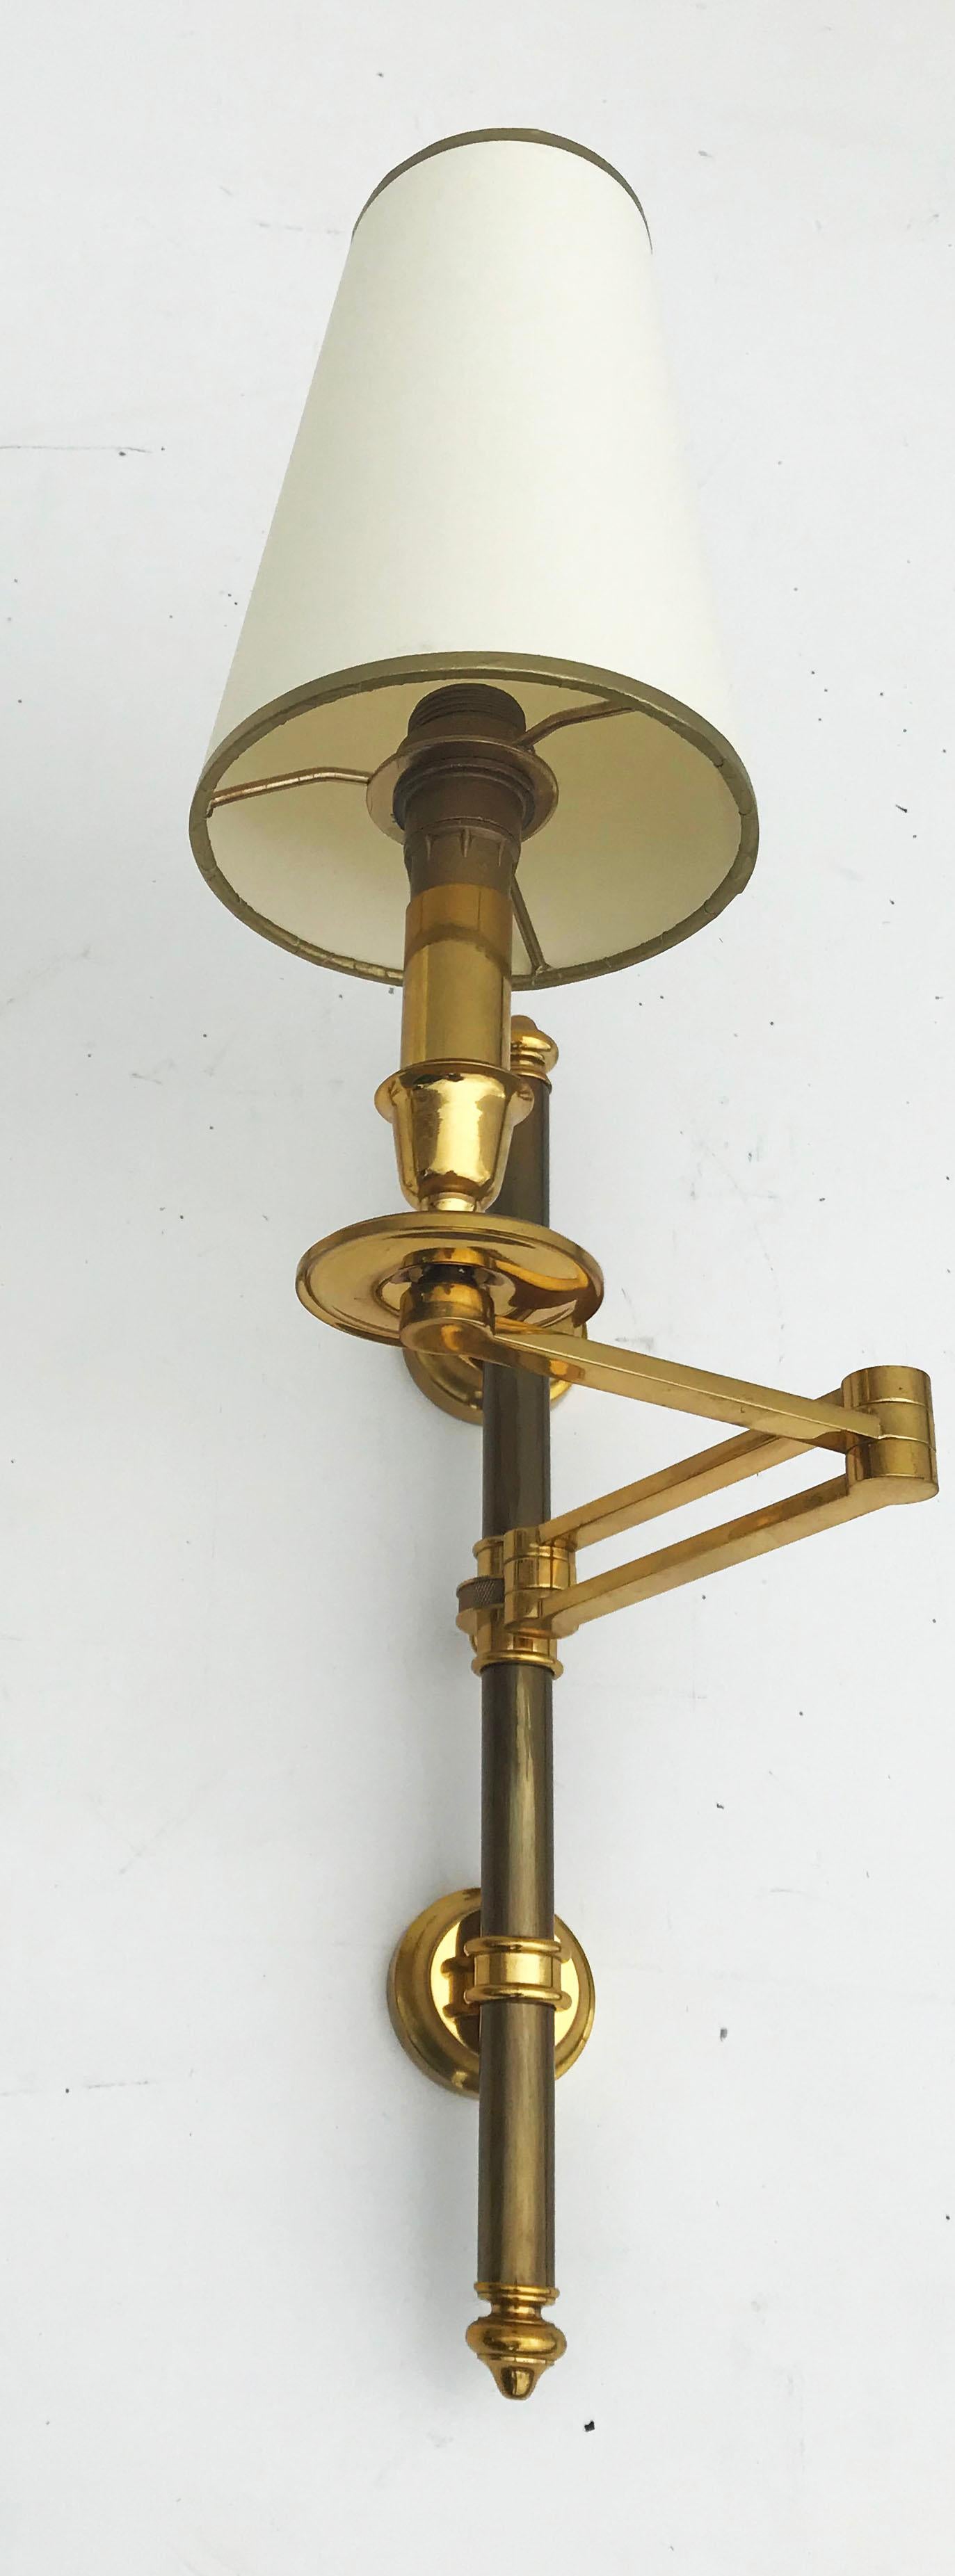 Superb pair of Maison Jansen retractable sconces,
US rewired and in working condition
Measures:
Back plate 2.3/8